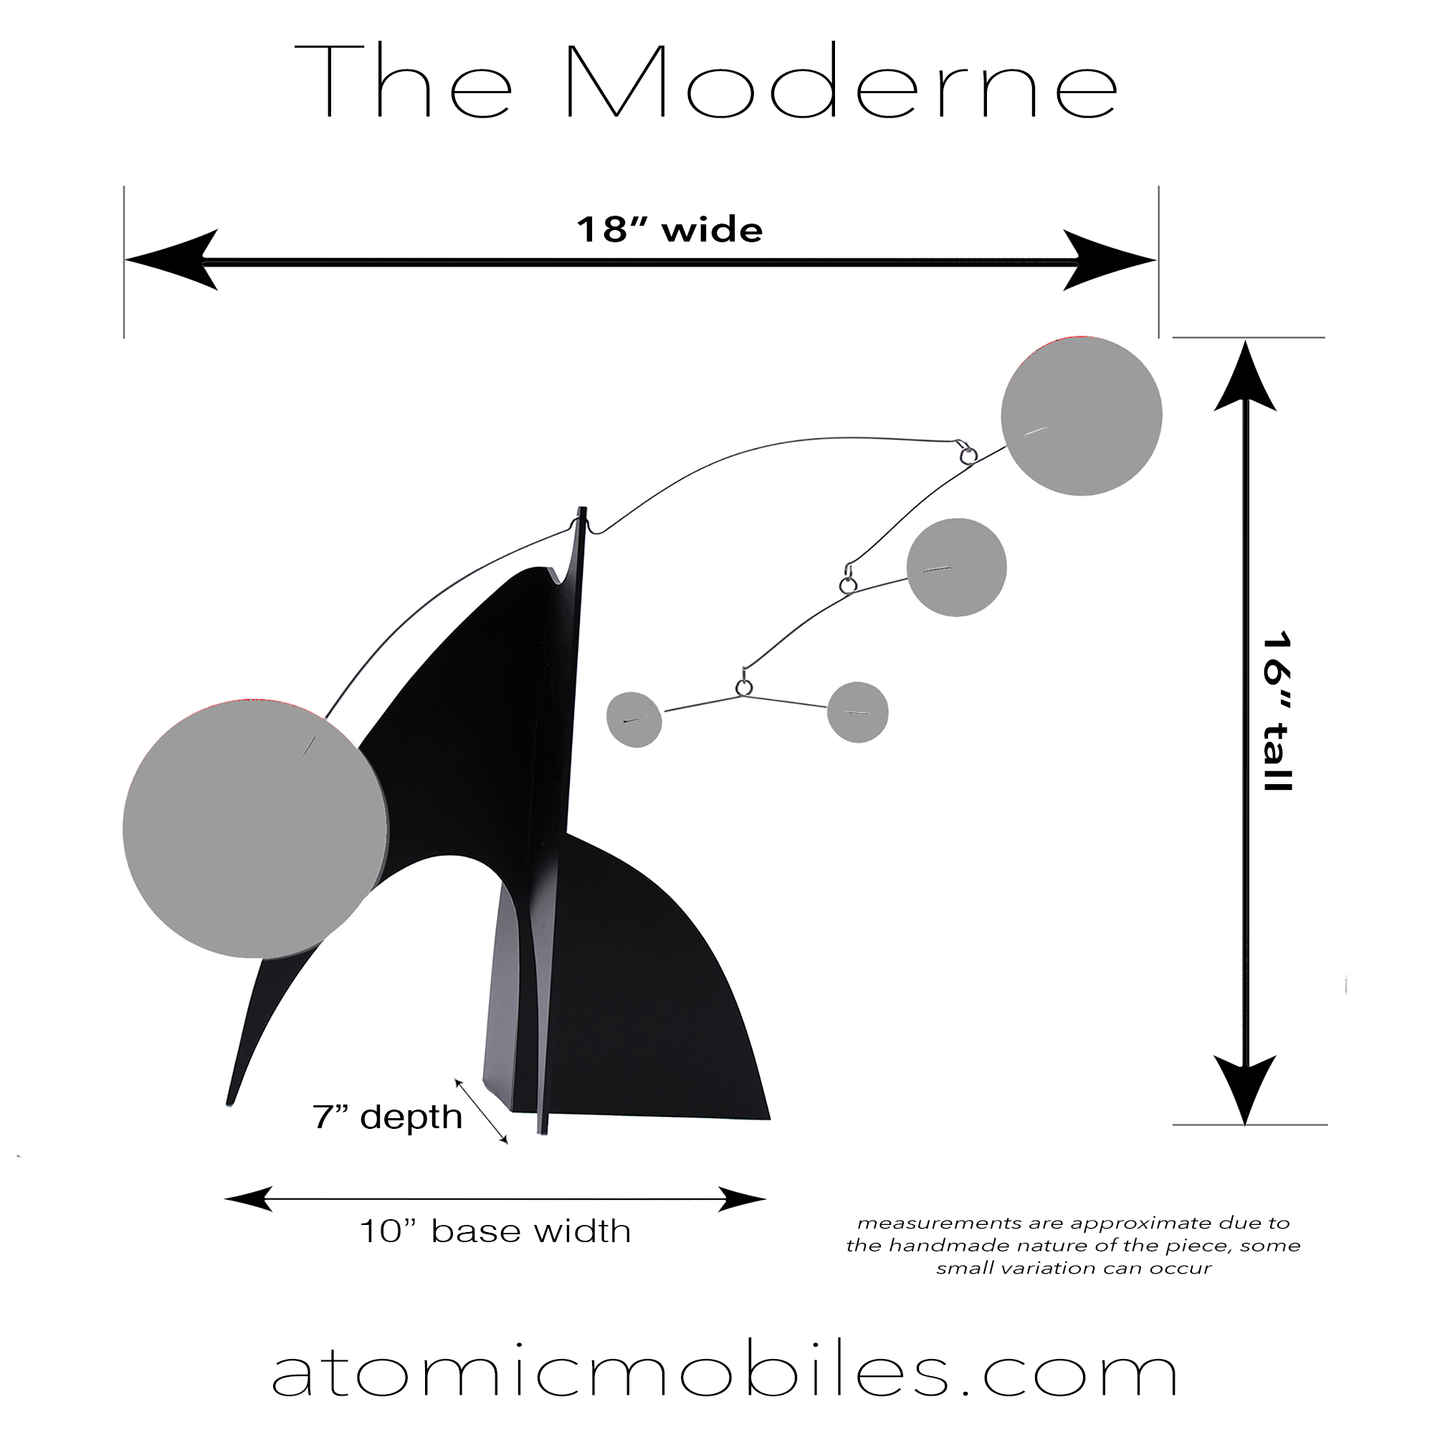 Measurements for The Moderne Art Stabile tabletop mobiles in exotic plexiglass acrylic - handmade in Los Angeles by AtomicMobiles.com 